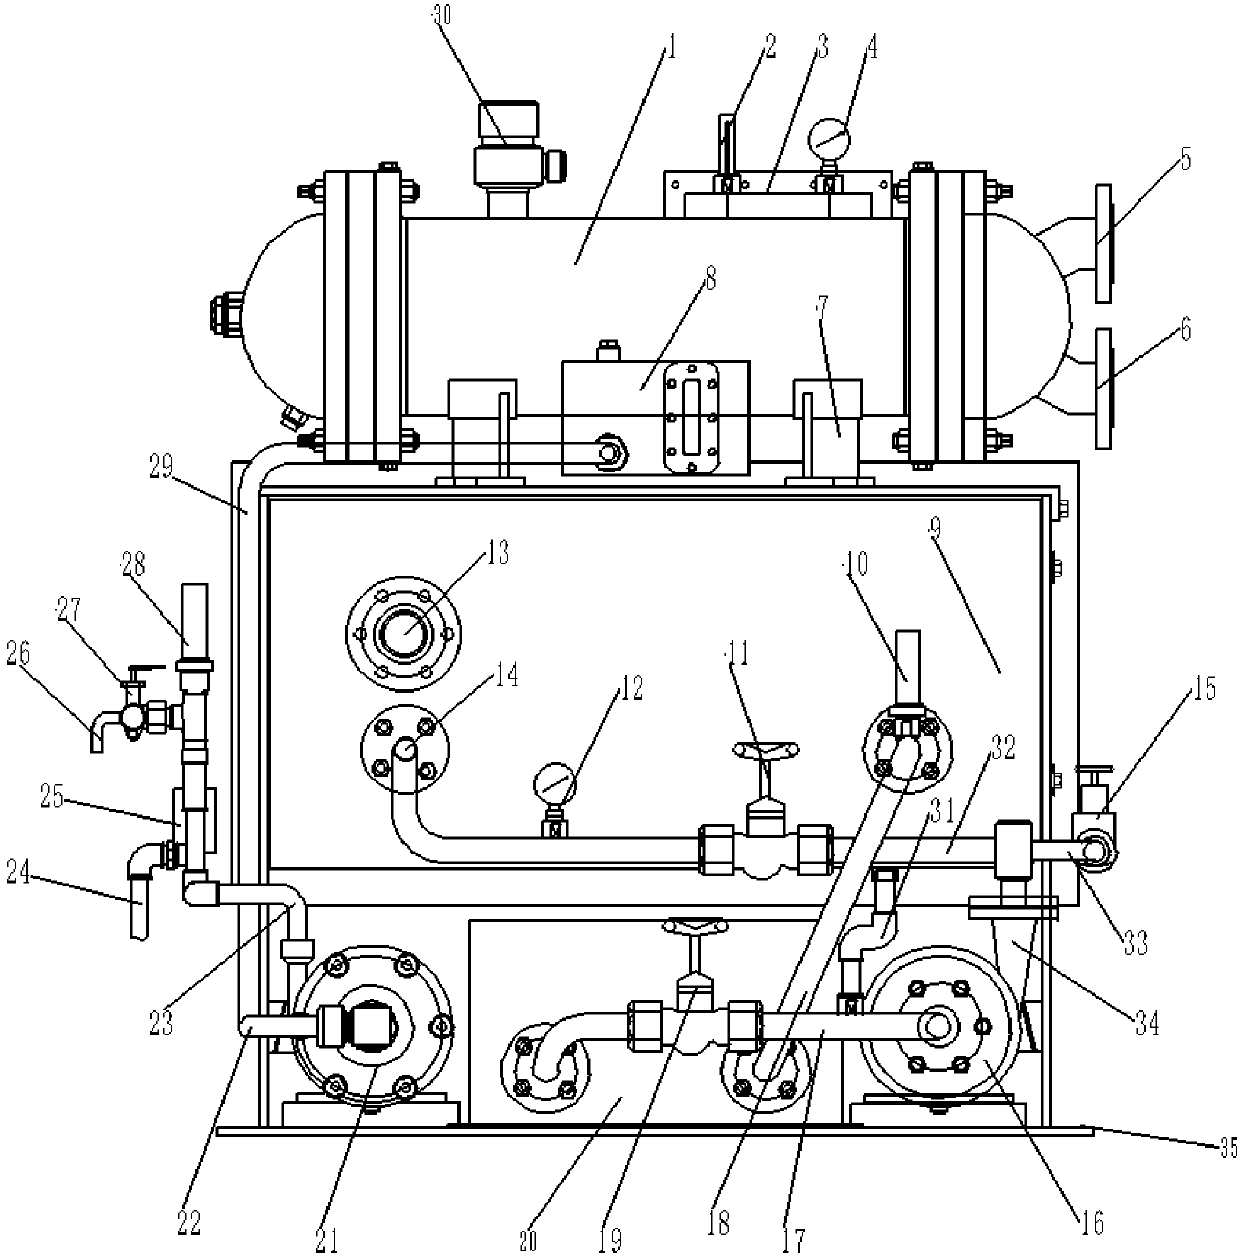 Compact type distillation-process seawater desalting device